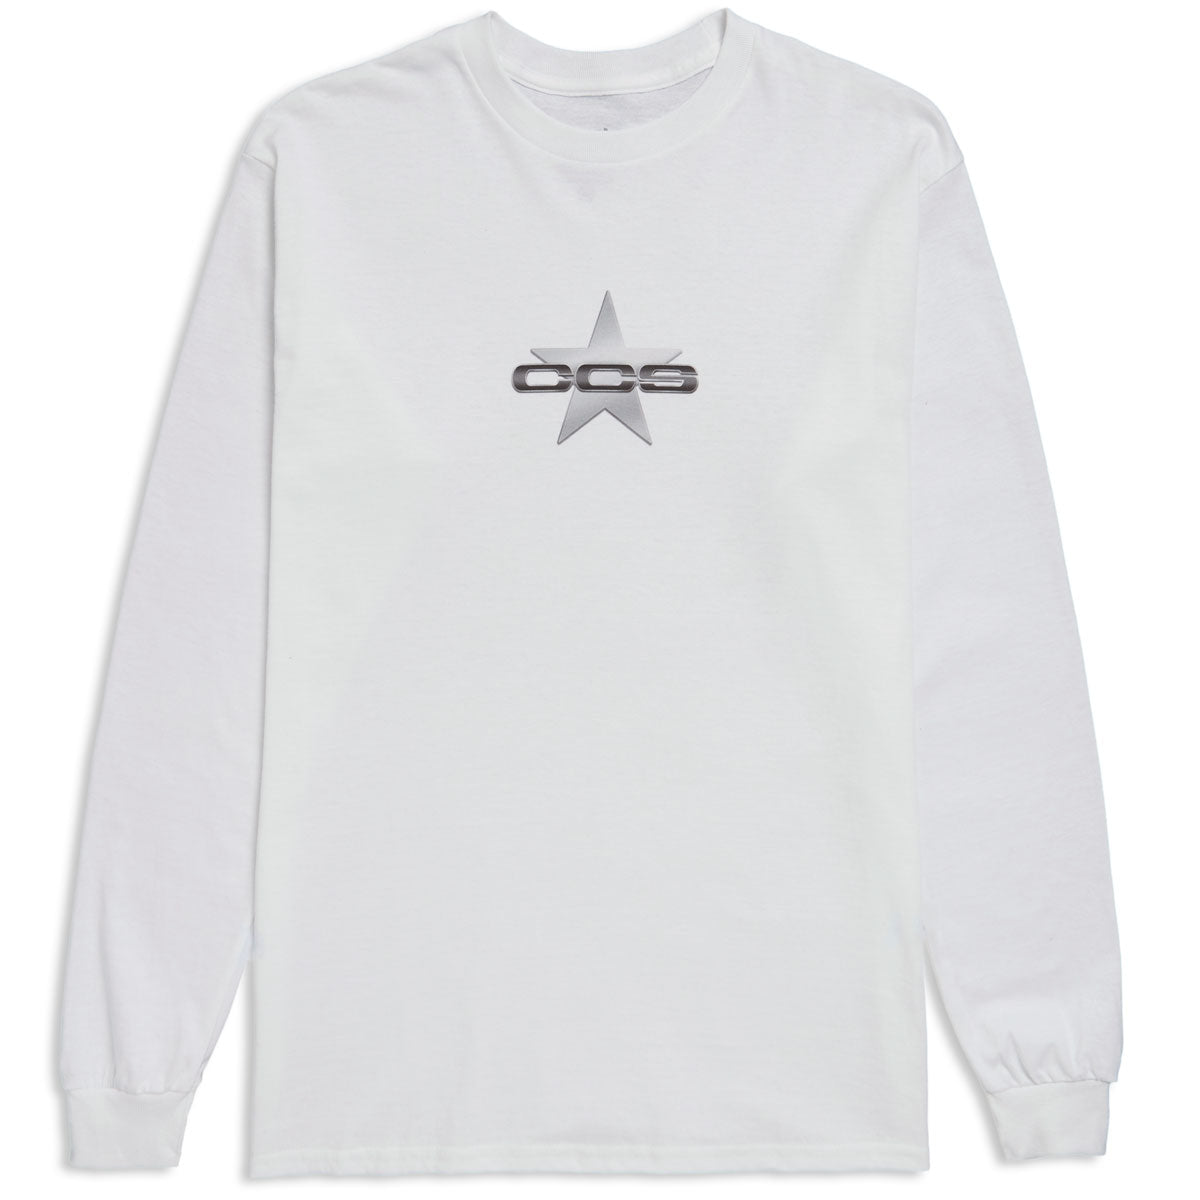 CCS 97 Star Long Sleeve T-Shirt - White - MD image 1